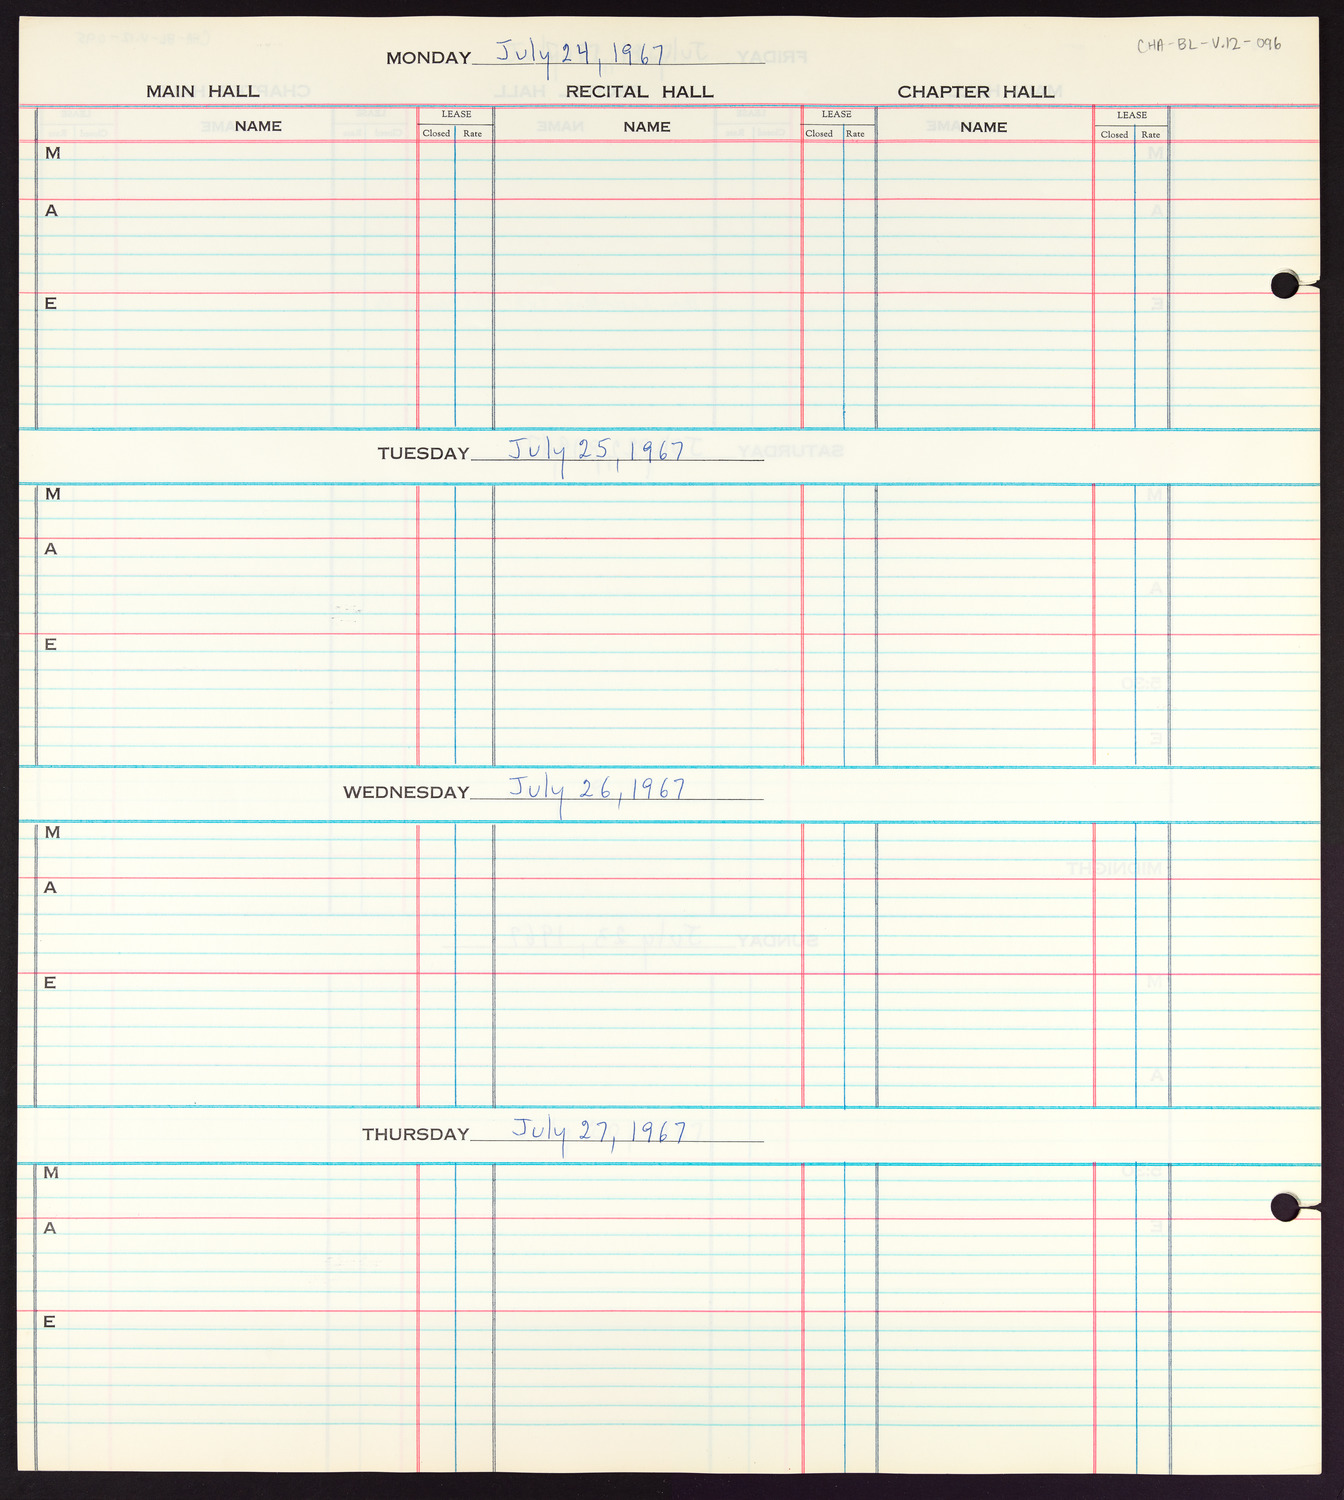 Carnegie Hall Booking Ledger, volume 12, page 96